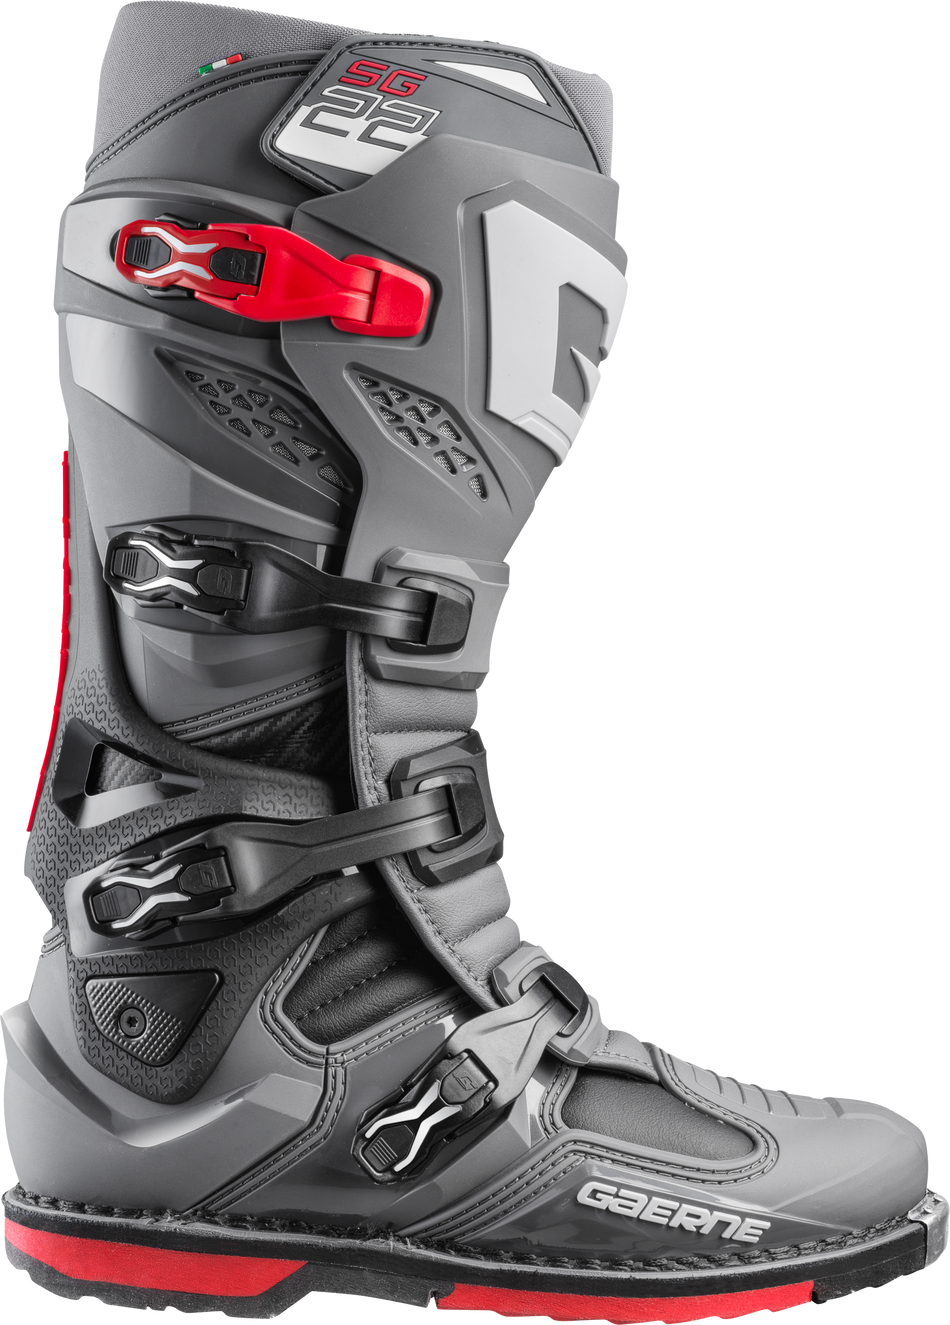 GAERNE Sg-22 Boots Anthracite/Black/Red Sz 08 2262-007-08